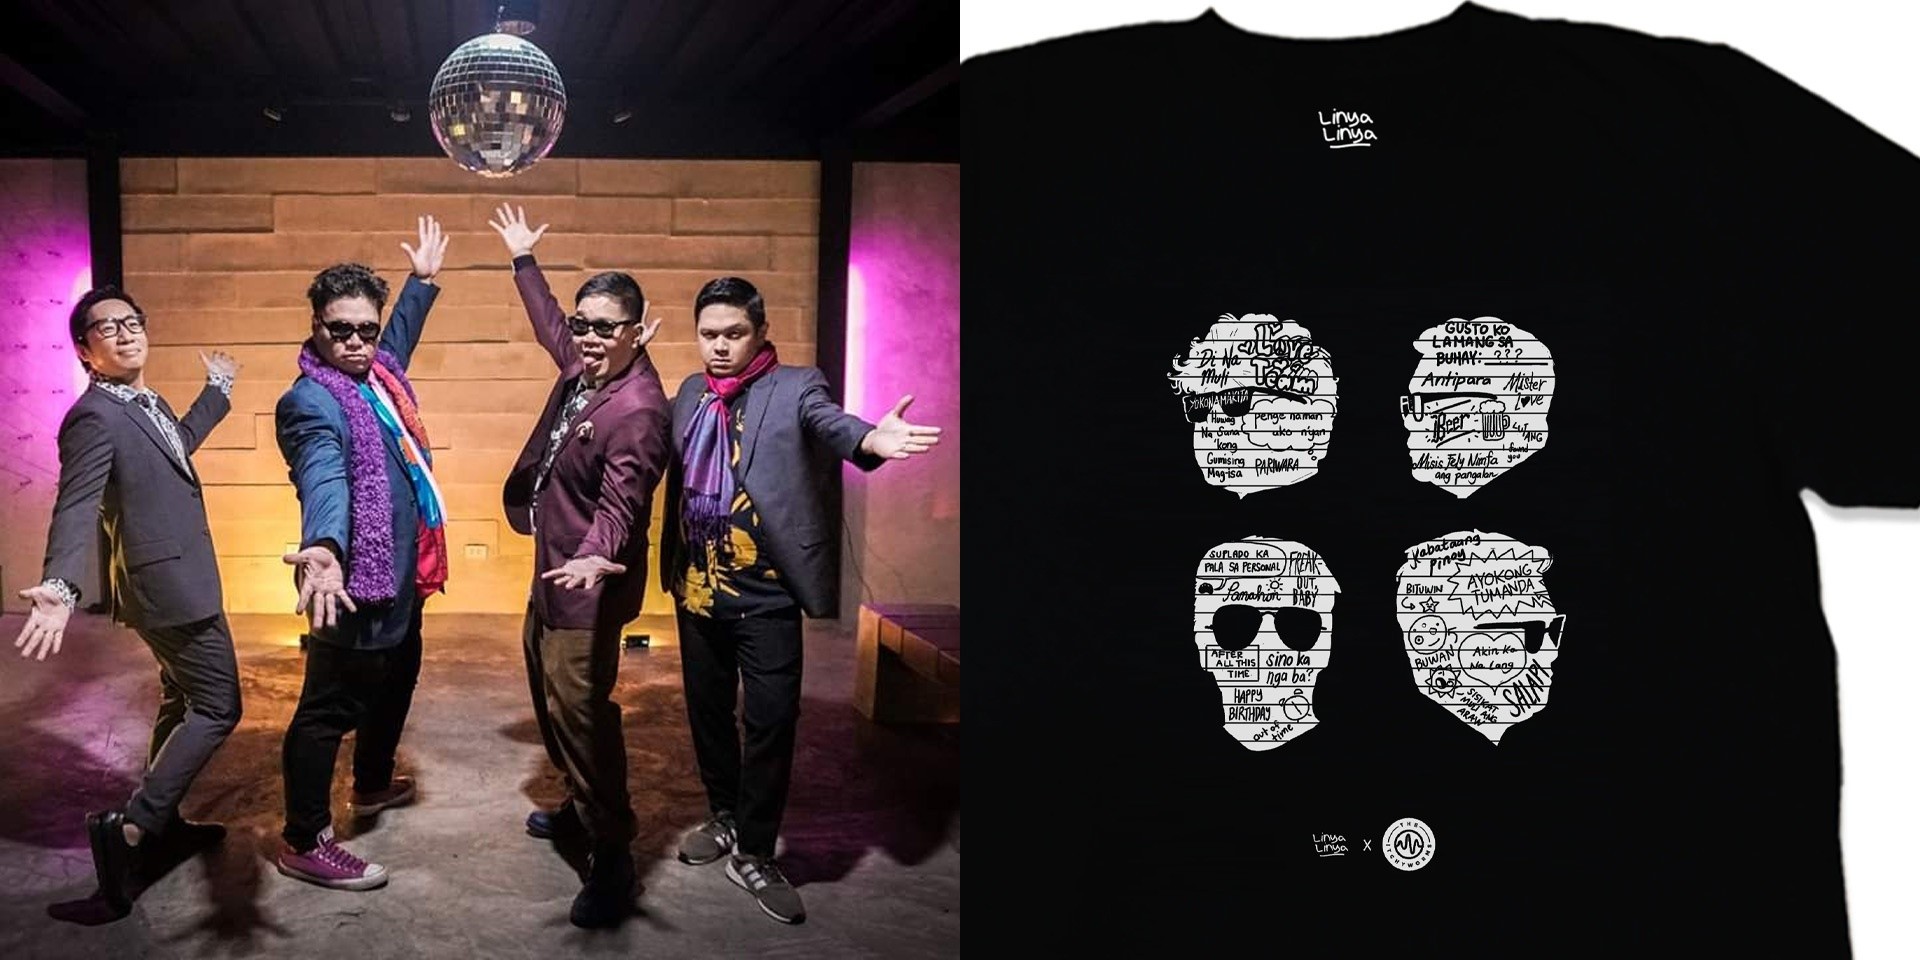 The Itchyworms release 20th anniversary shirt with Linya-Linya